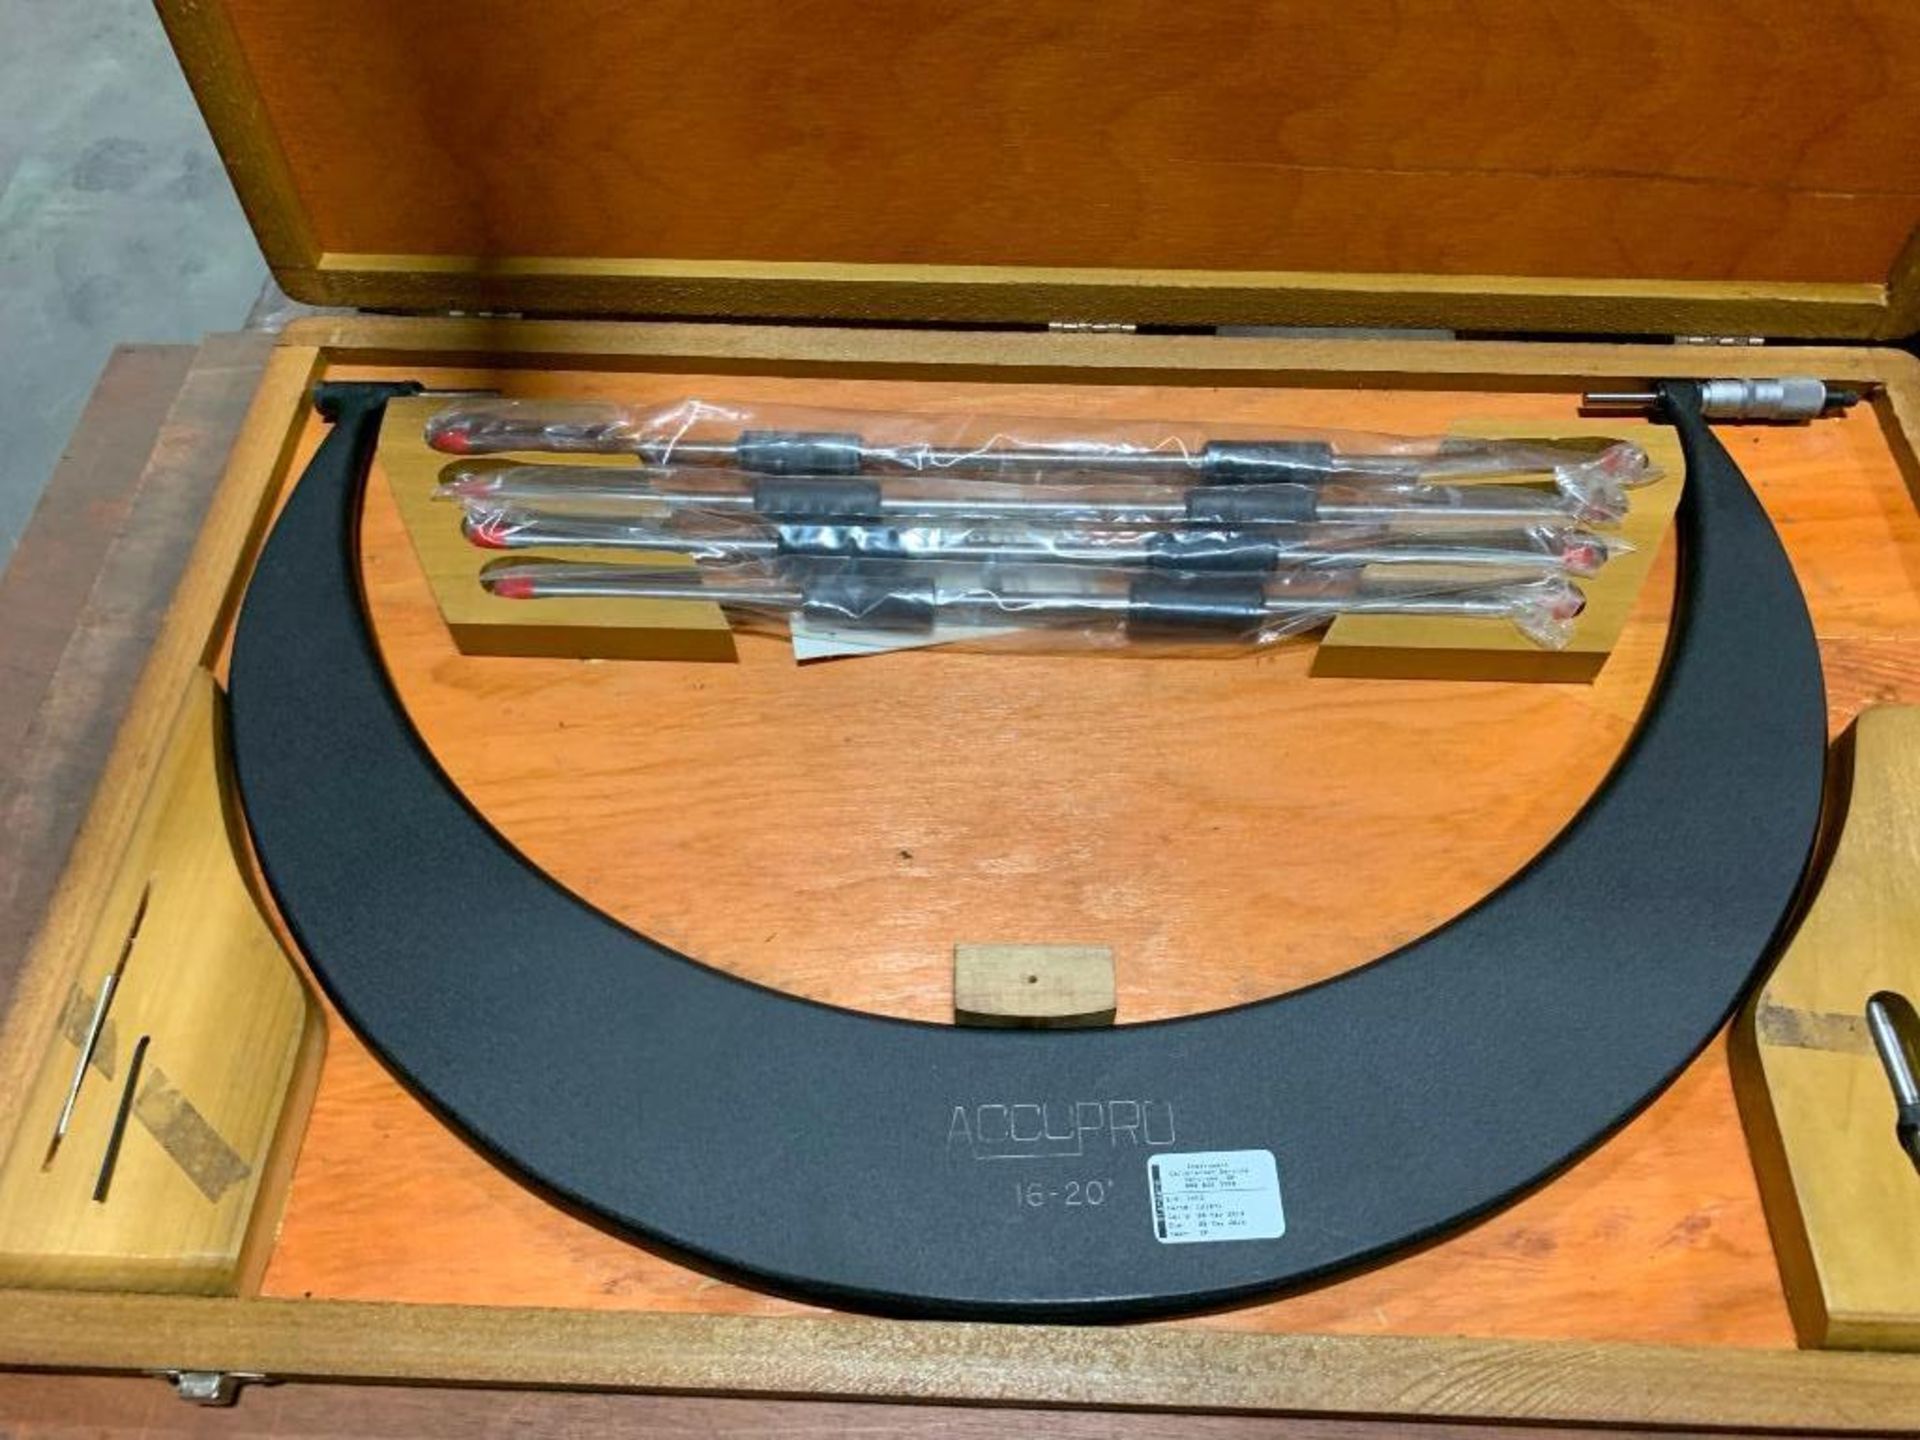 ACCUPRO 16''-20'' OUTSIDE MICROMETER SET - Image 2 of 3